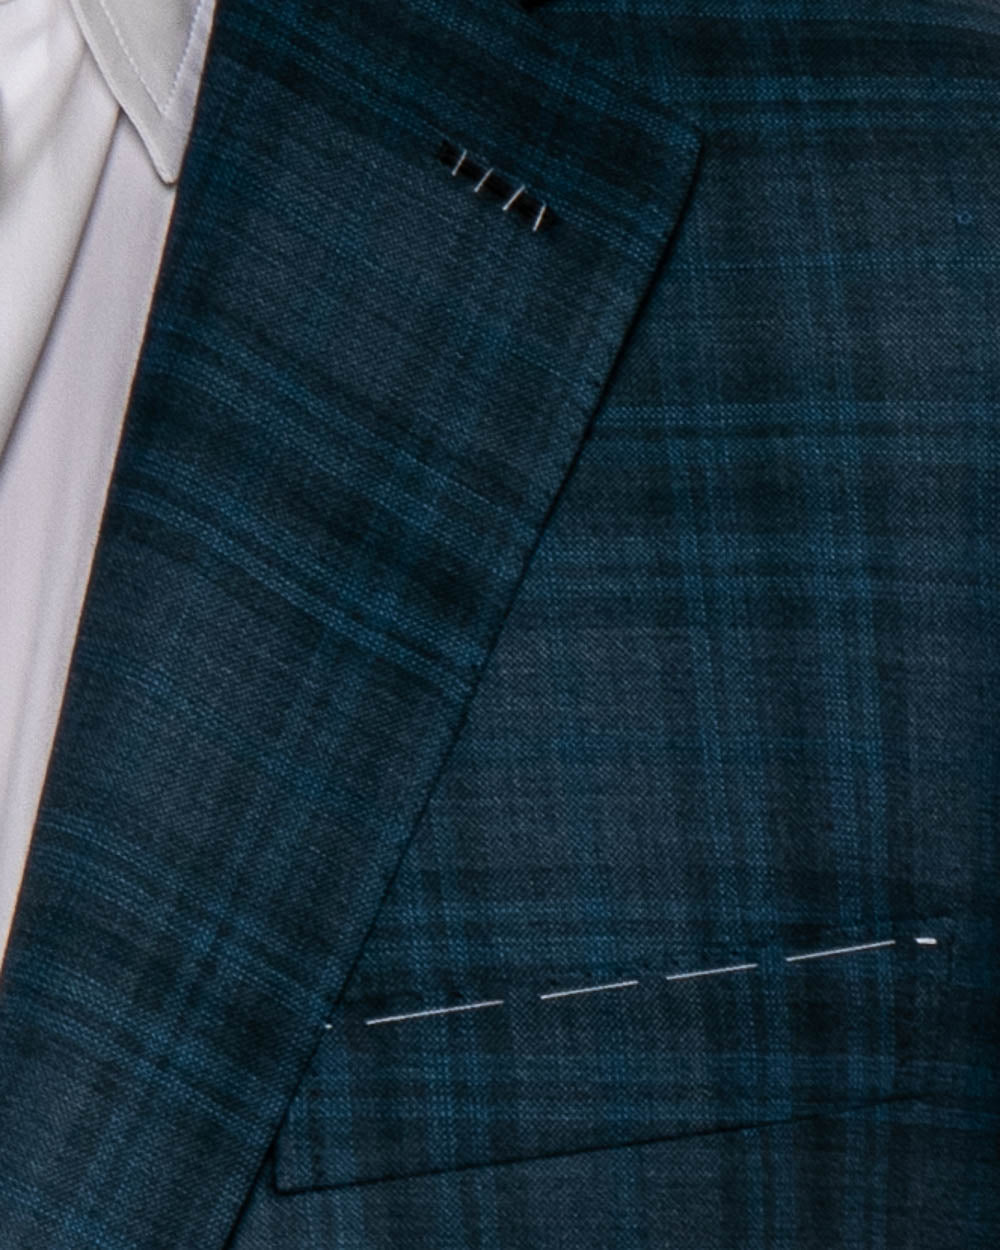 Heathered Dark Teal and Blue Plaid Sportcoat